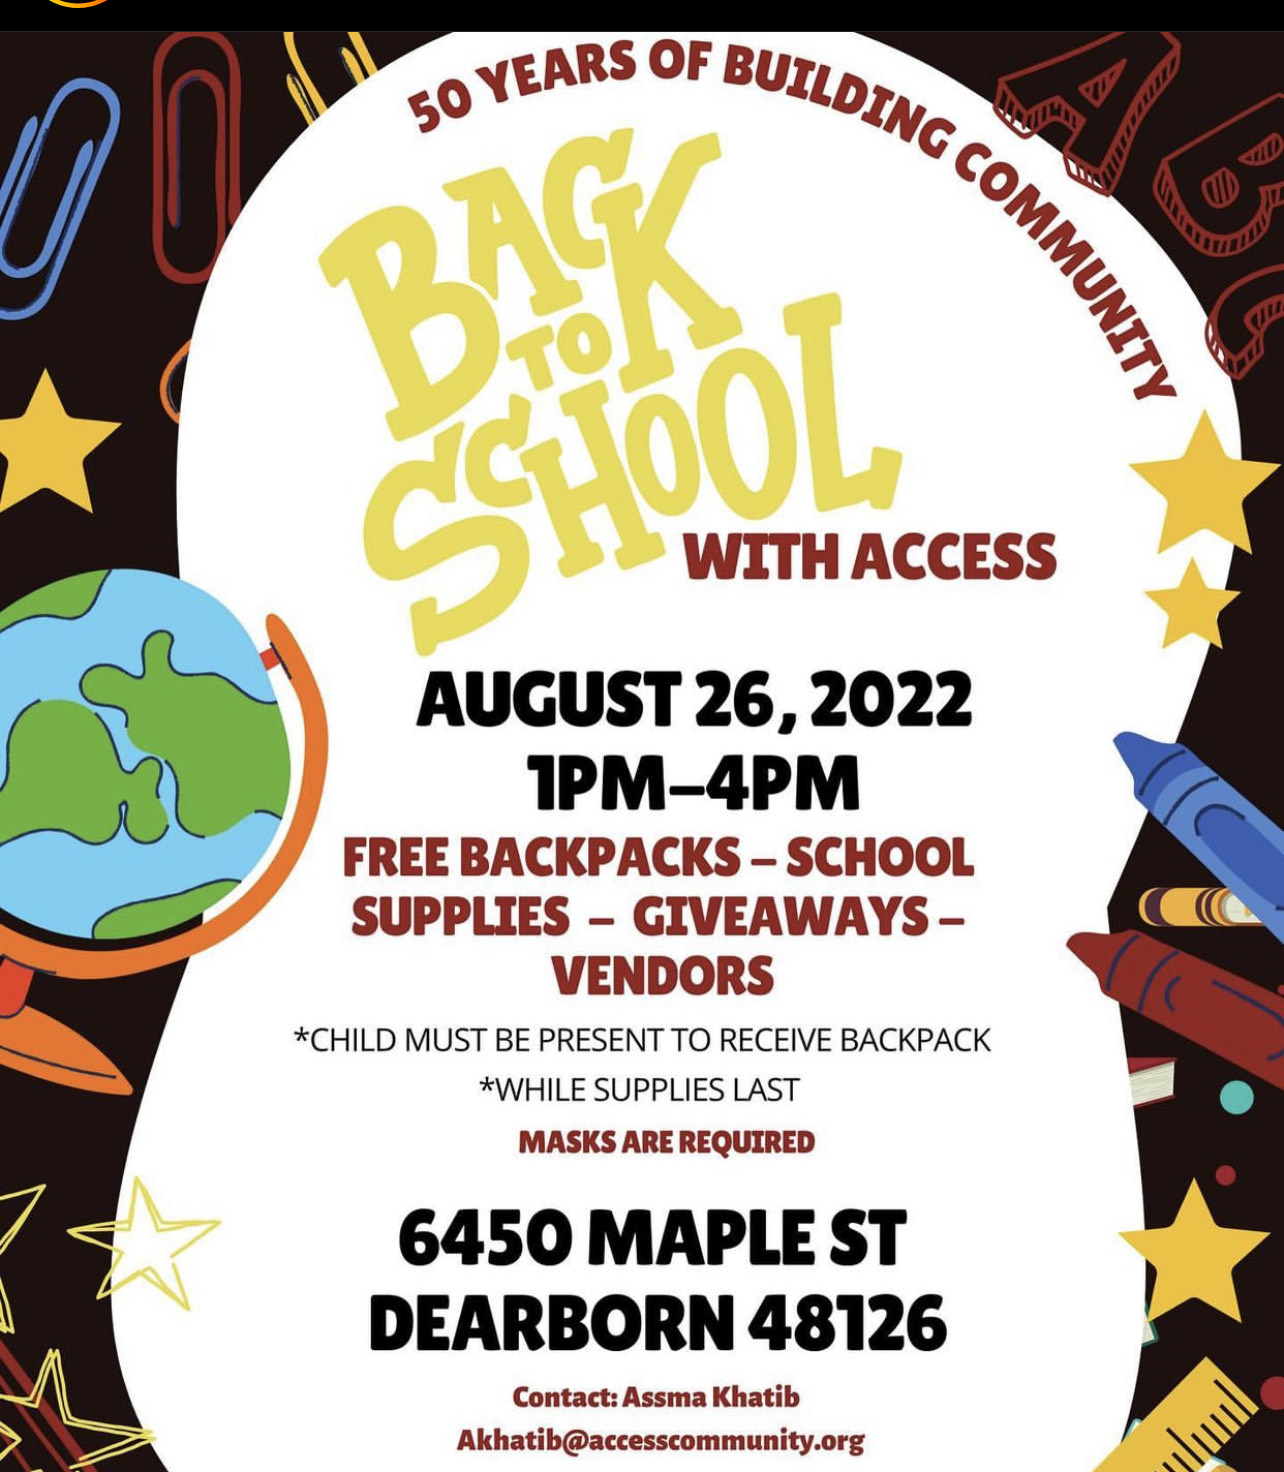 Free Backpacks, school supplies, giveaways and more- Friday August 26